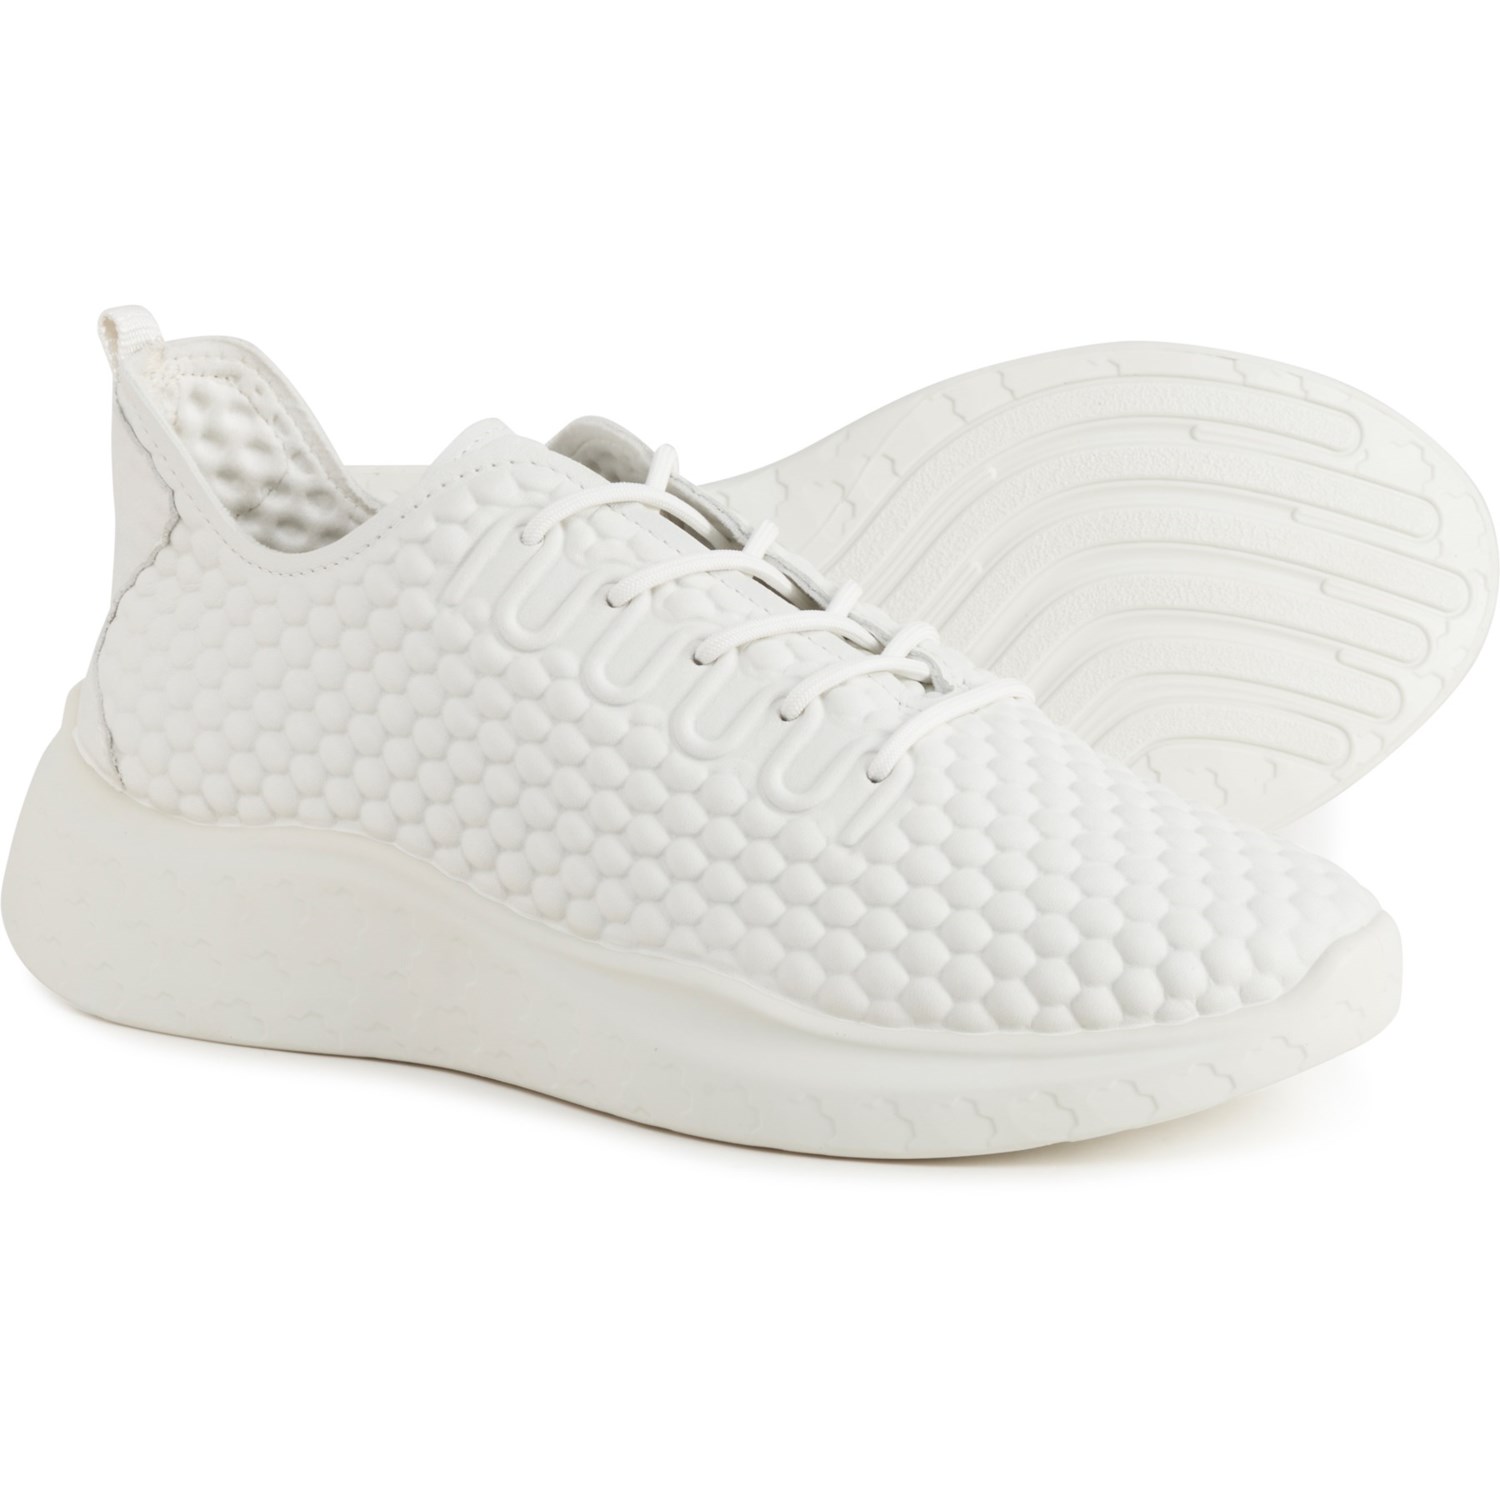 ECCO Therap Sneakers (For Women) - Save 33%